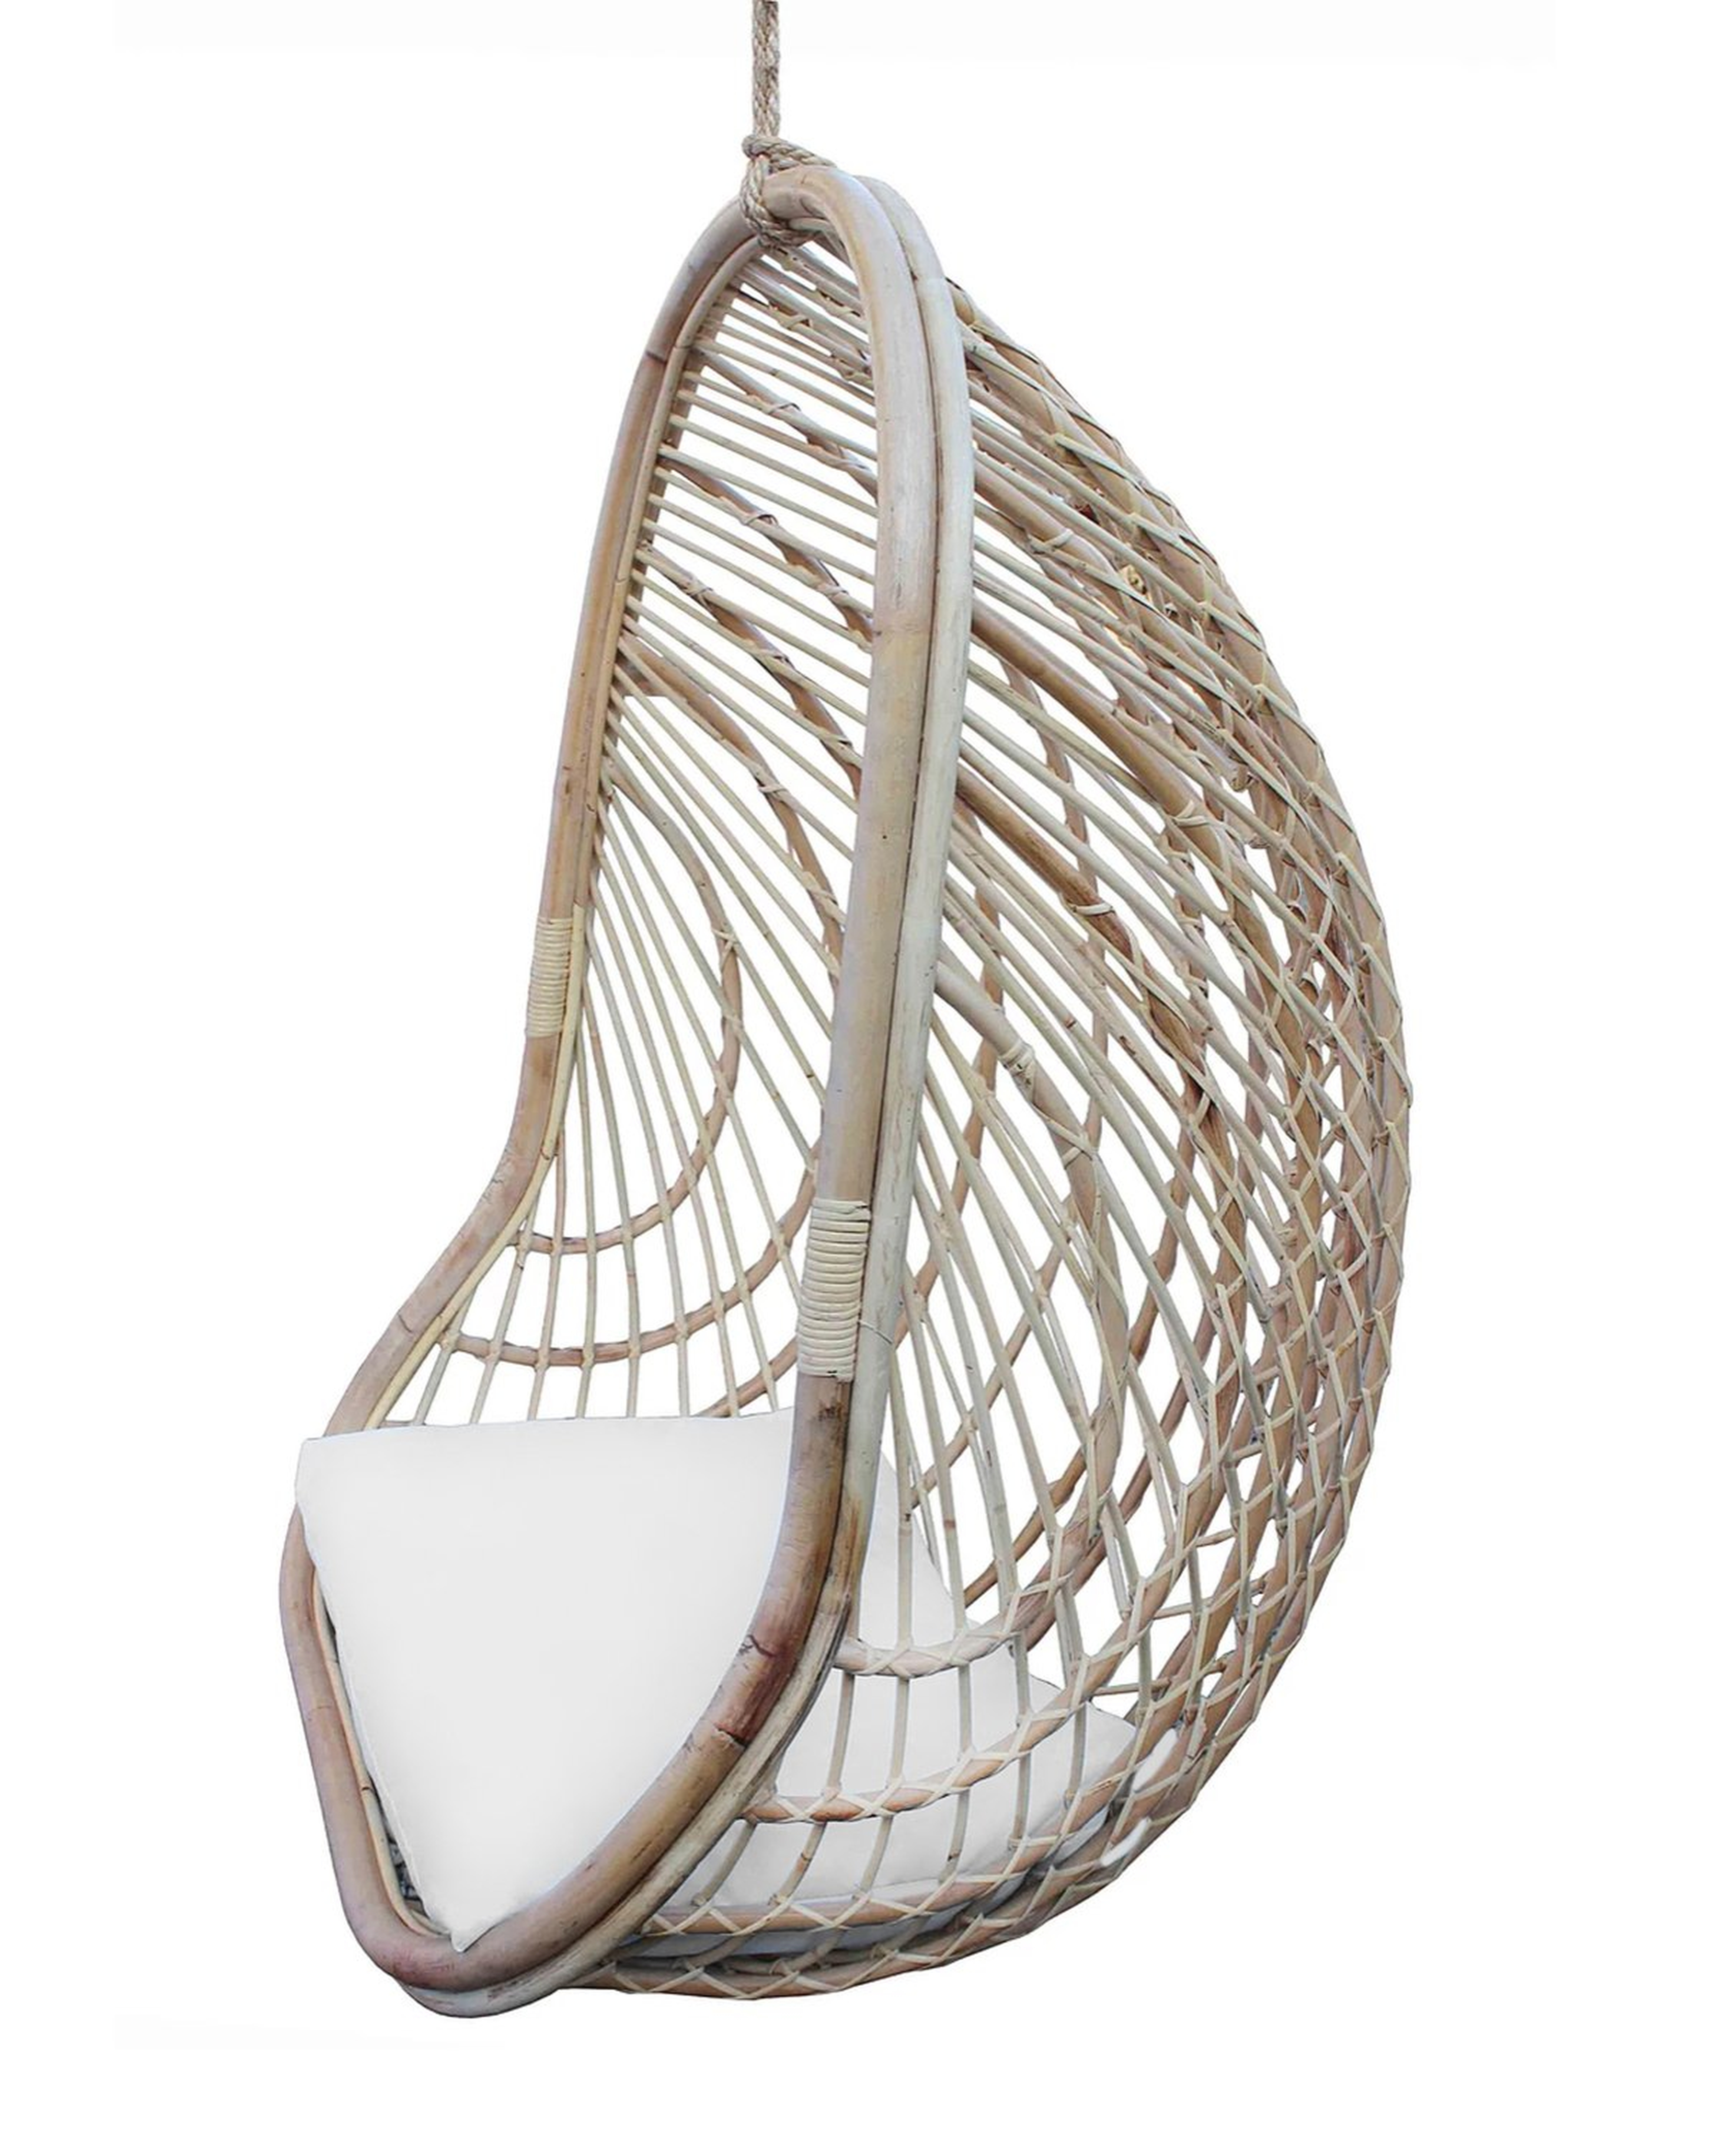 HAMLET HANGING CHAIR - McGee & Co.